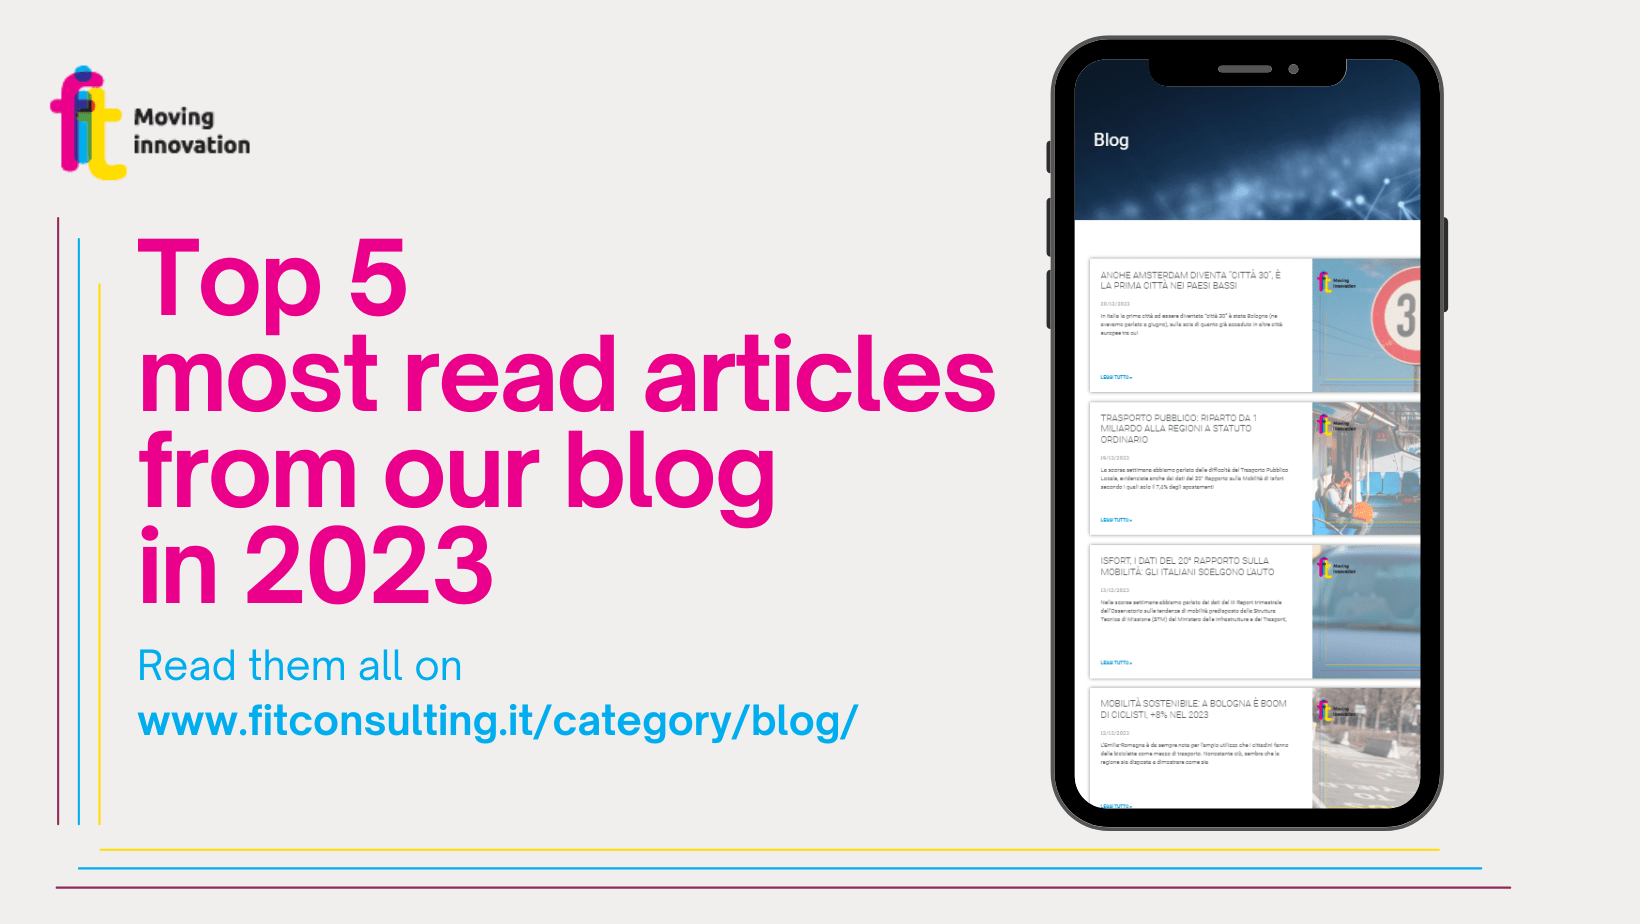 The 5 most read articles on our blog in 2023